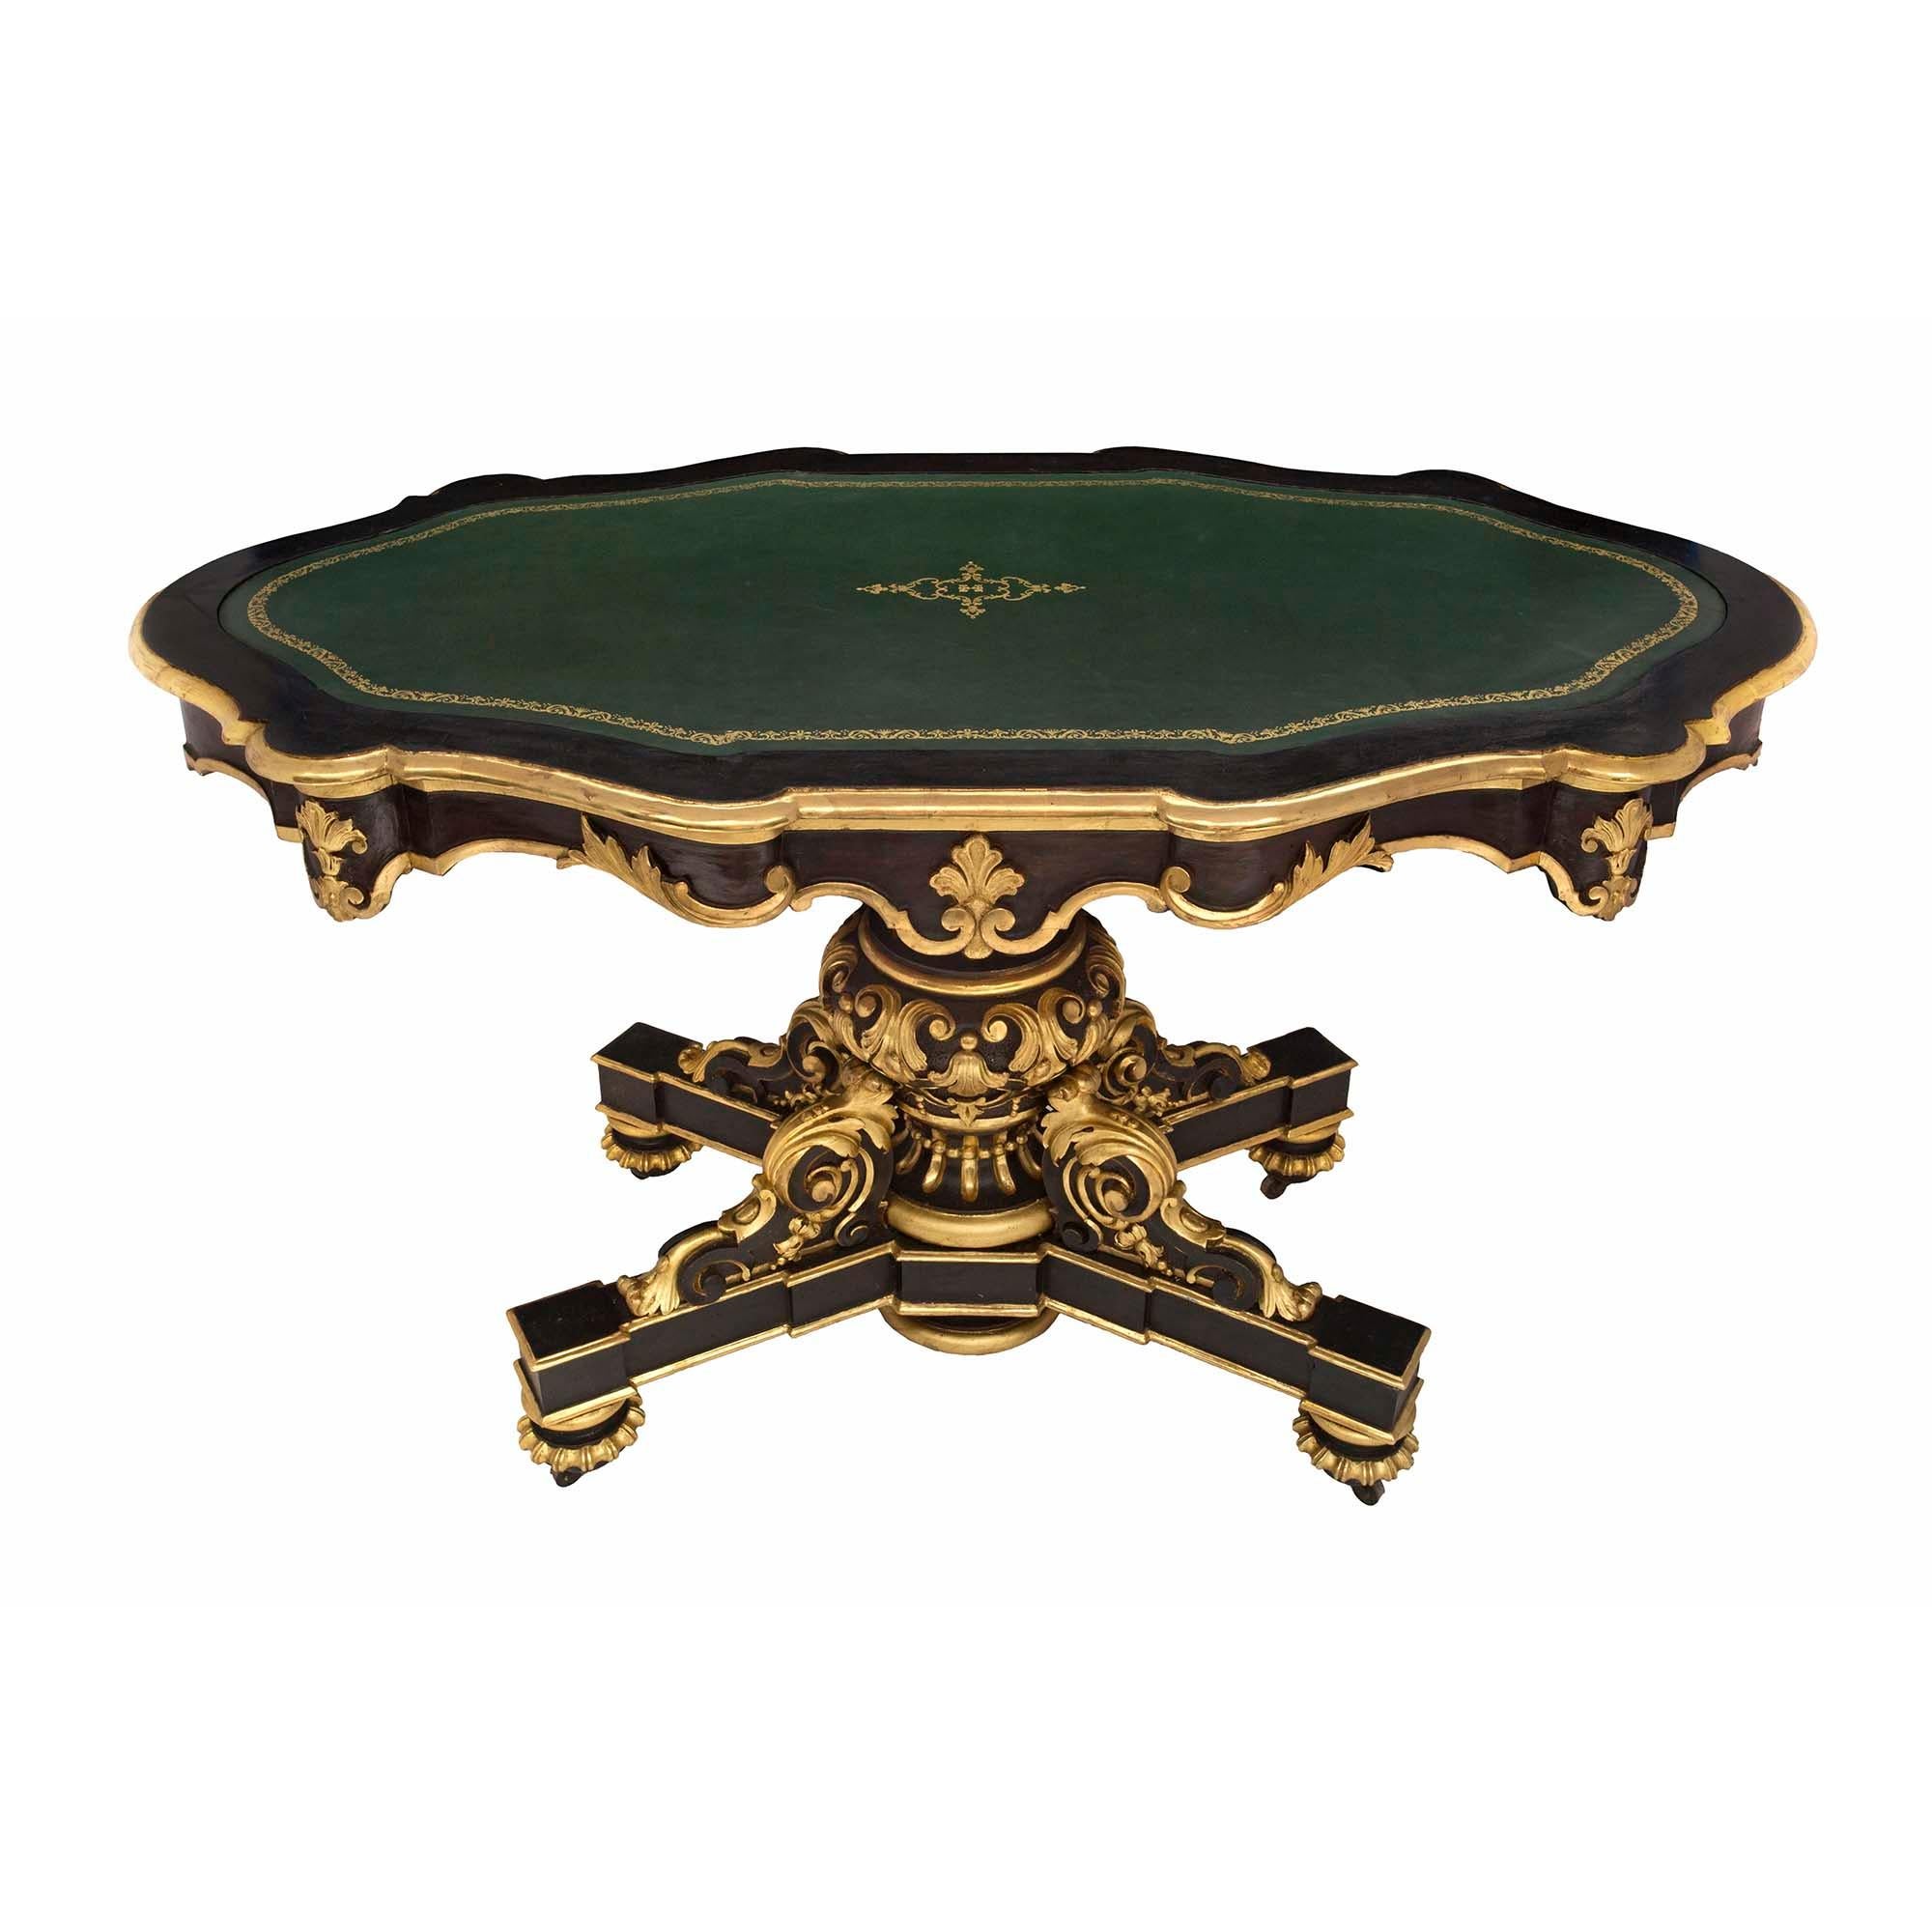 A most impressive Italian 19th century Napoleon III period patinated black and giltwood oval center table. The table is raised by circular mottled feet with a decorative reeded giltwood band and their original casters. The X-shaped base displays a